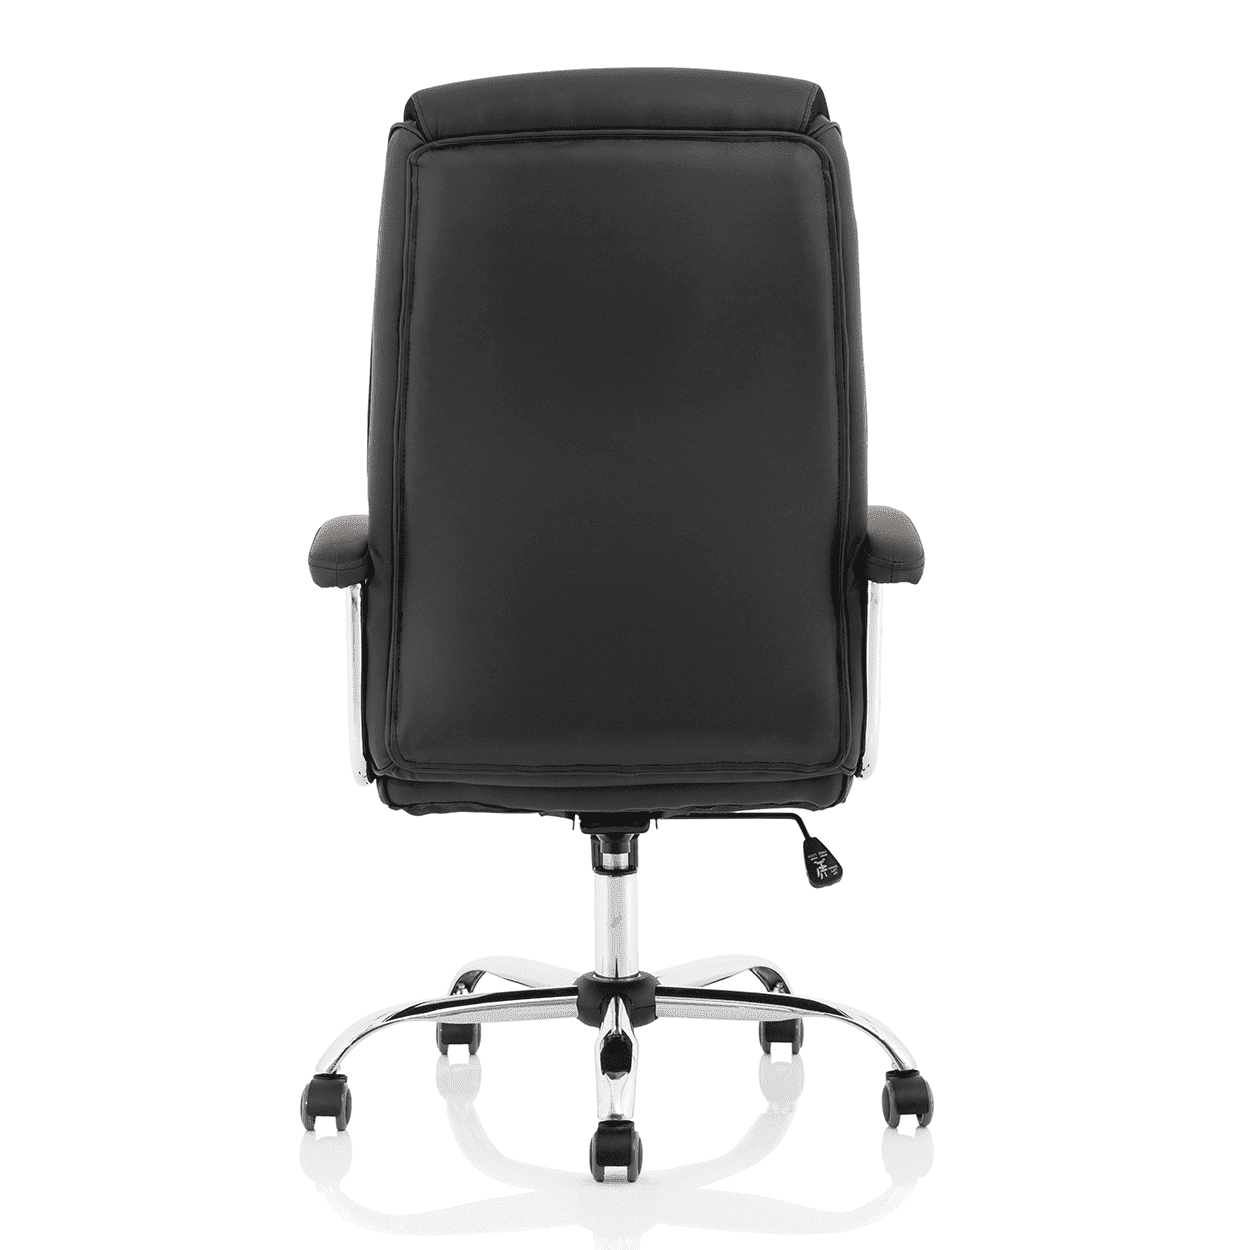 Hatley High Back Executive Office Chair - Black Bonded Leather, Chrome Frame, Fixed Arms, 120kg Capacity, 8hr Usage, 1yr Warranty (650x700x1130-1210mm)